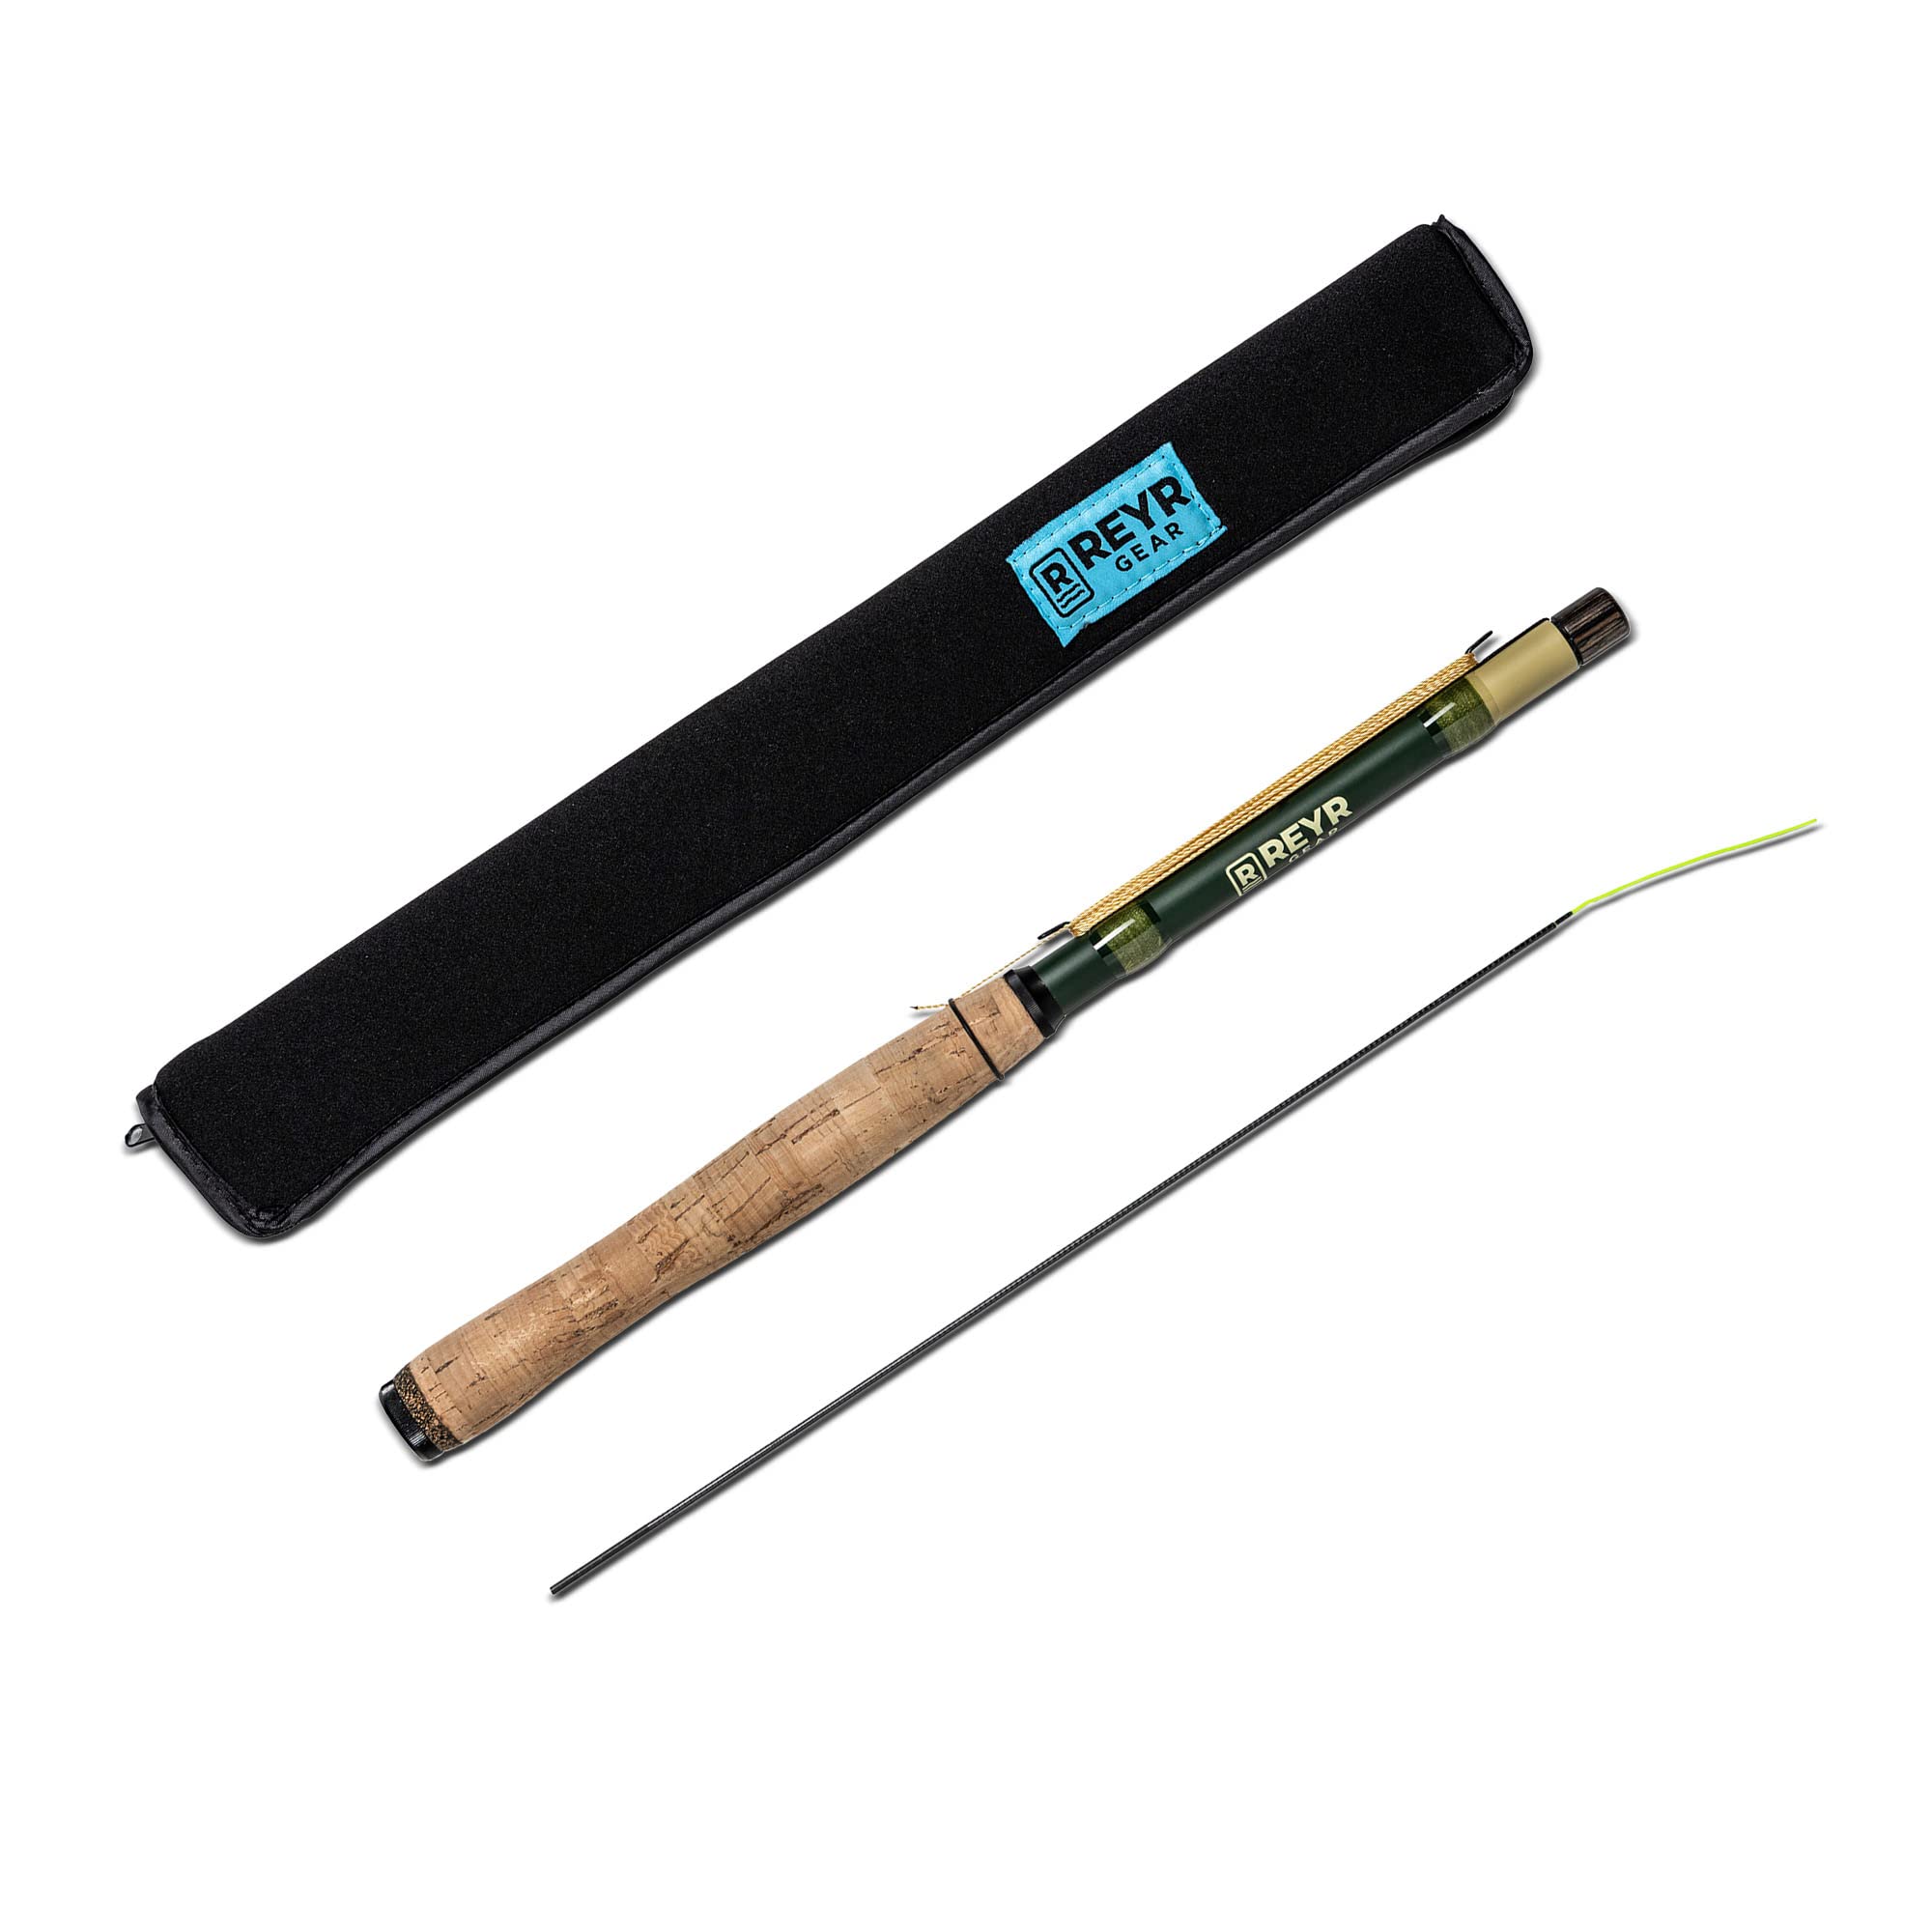 REYR Gear - Tiny Cast Tenkara Rod, Ultralight Fishing Rod with Built-in  Line Keepers, Telescopic Travel Rod for Smaller Waters, Portable Fly Fishing  Kit for Backpacking Trips